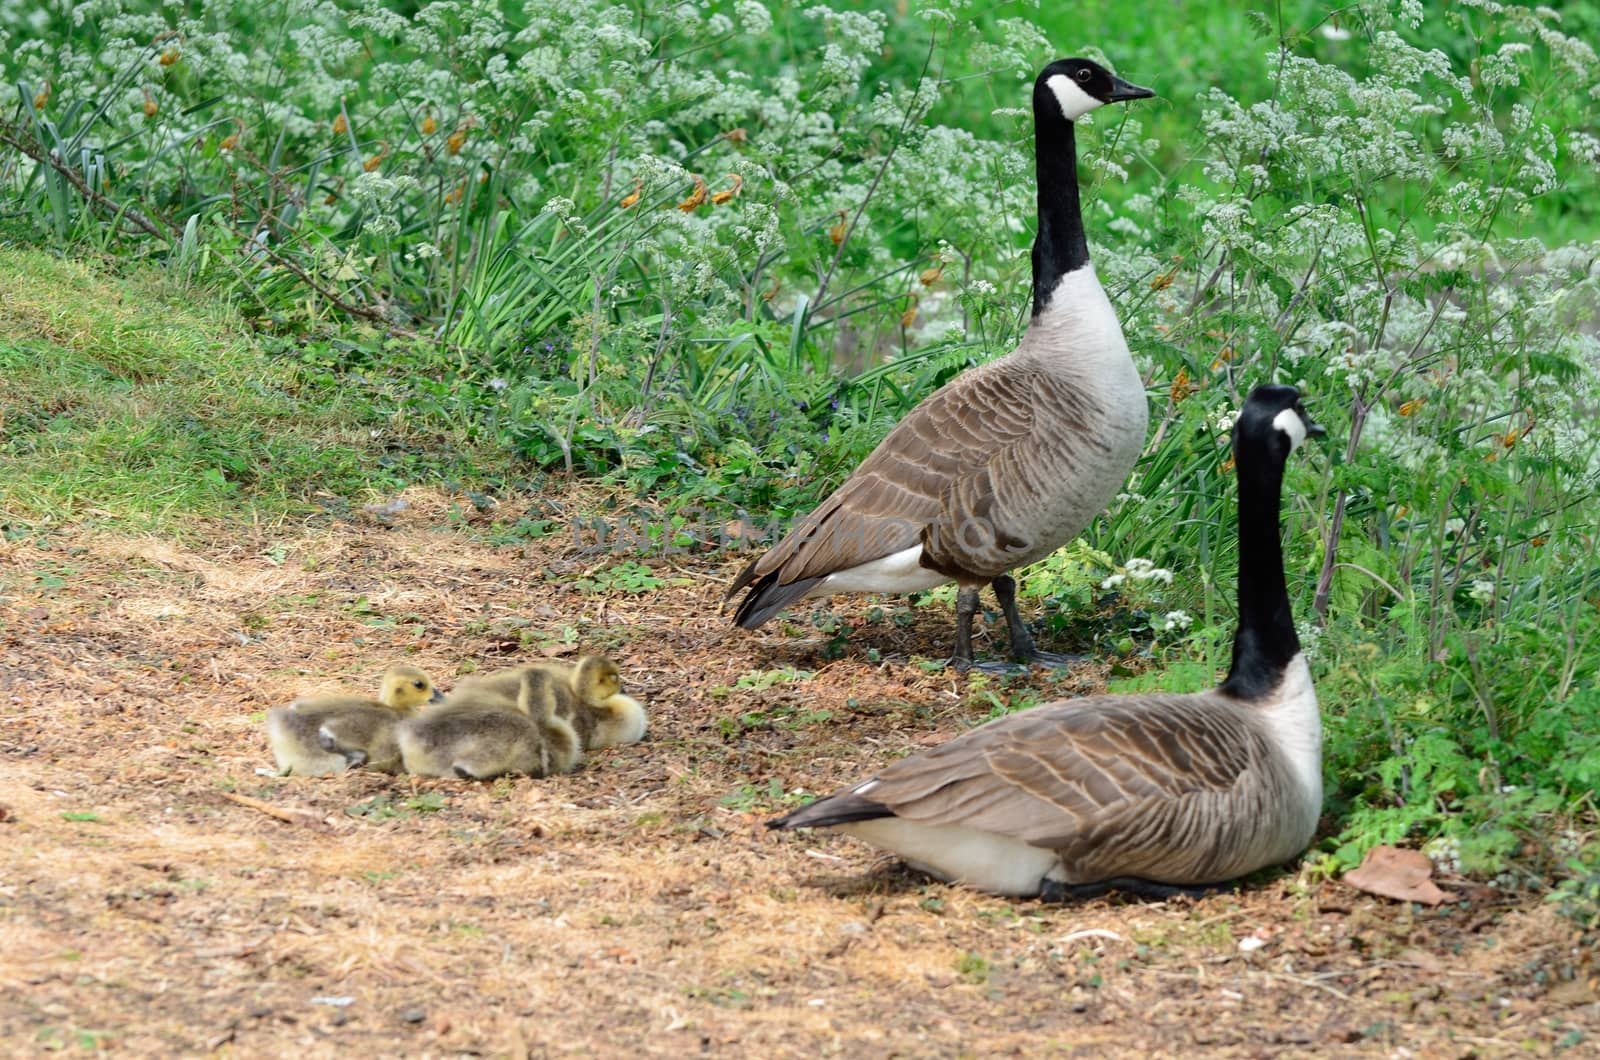 Geese with goslings by pauws99